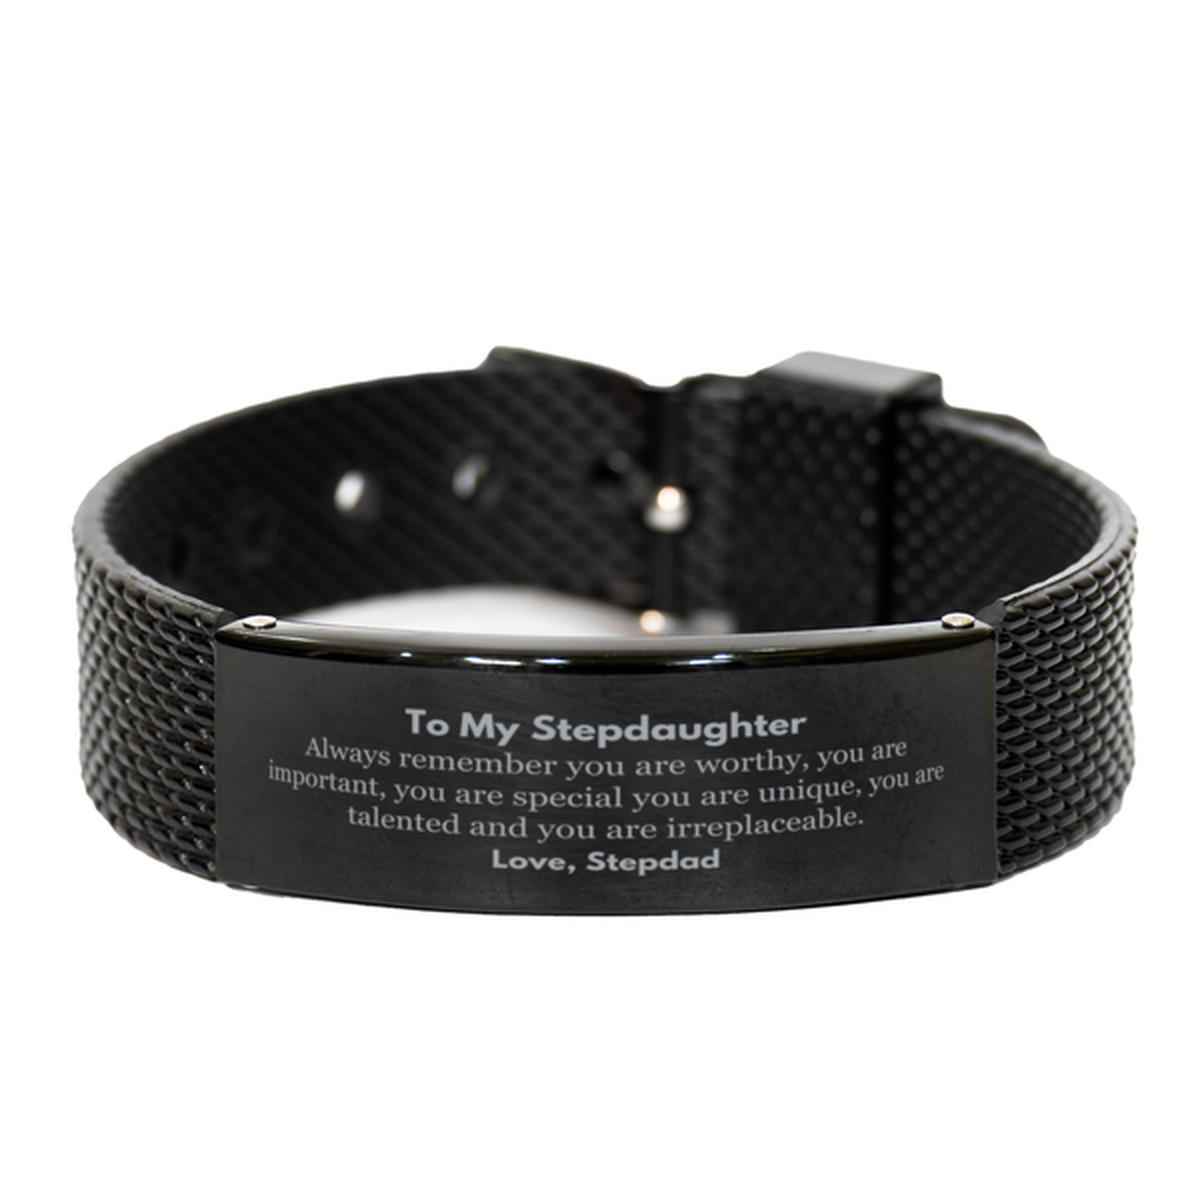 Stepdaughter Birthday Gifts from Stepdad, Inspirational Black Shark Mesh Bracelet for Stepdaughter Christmas Graduation Gifts for Stepdaughter Always remember you are worthy, you are important. Love, Stepdad